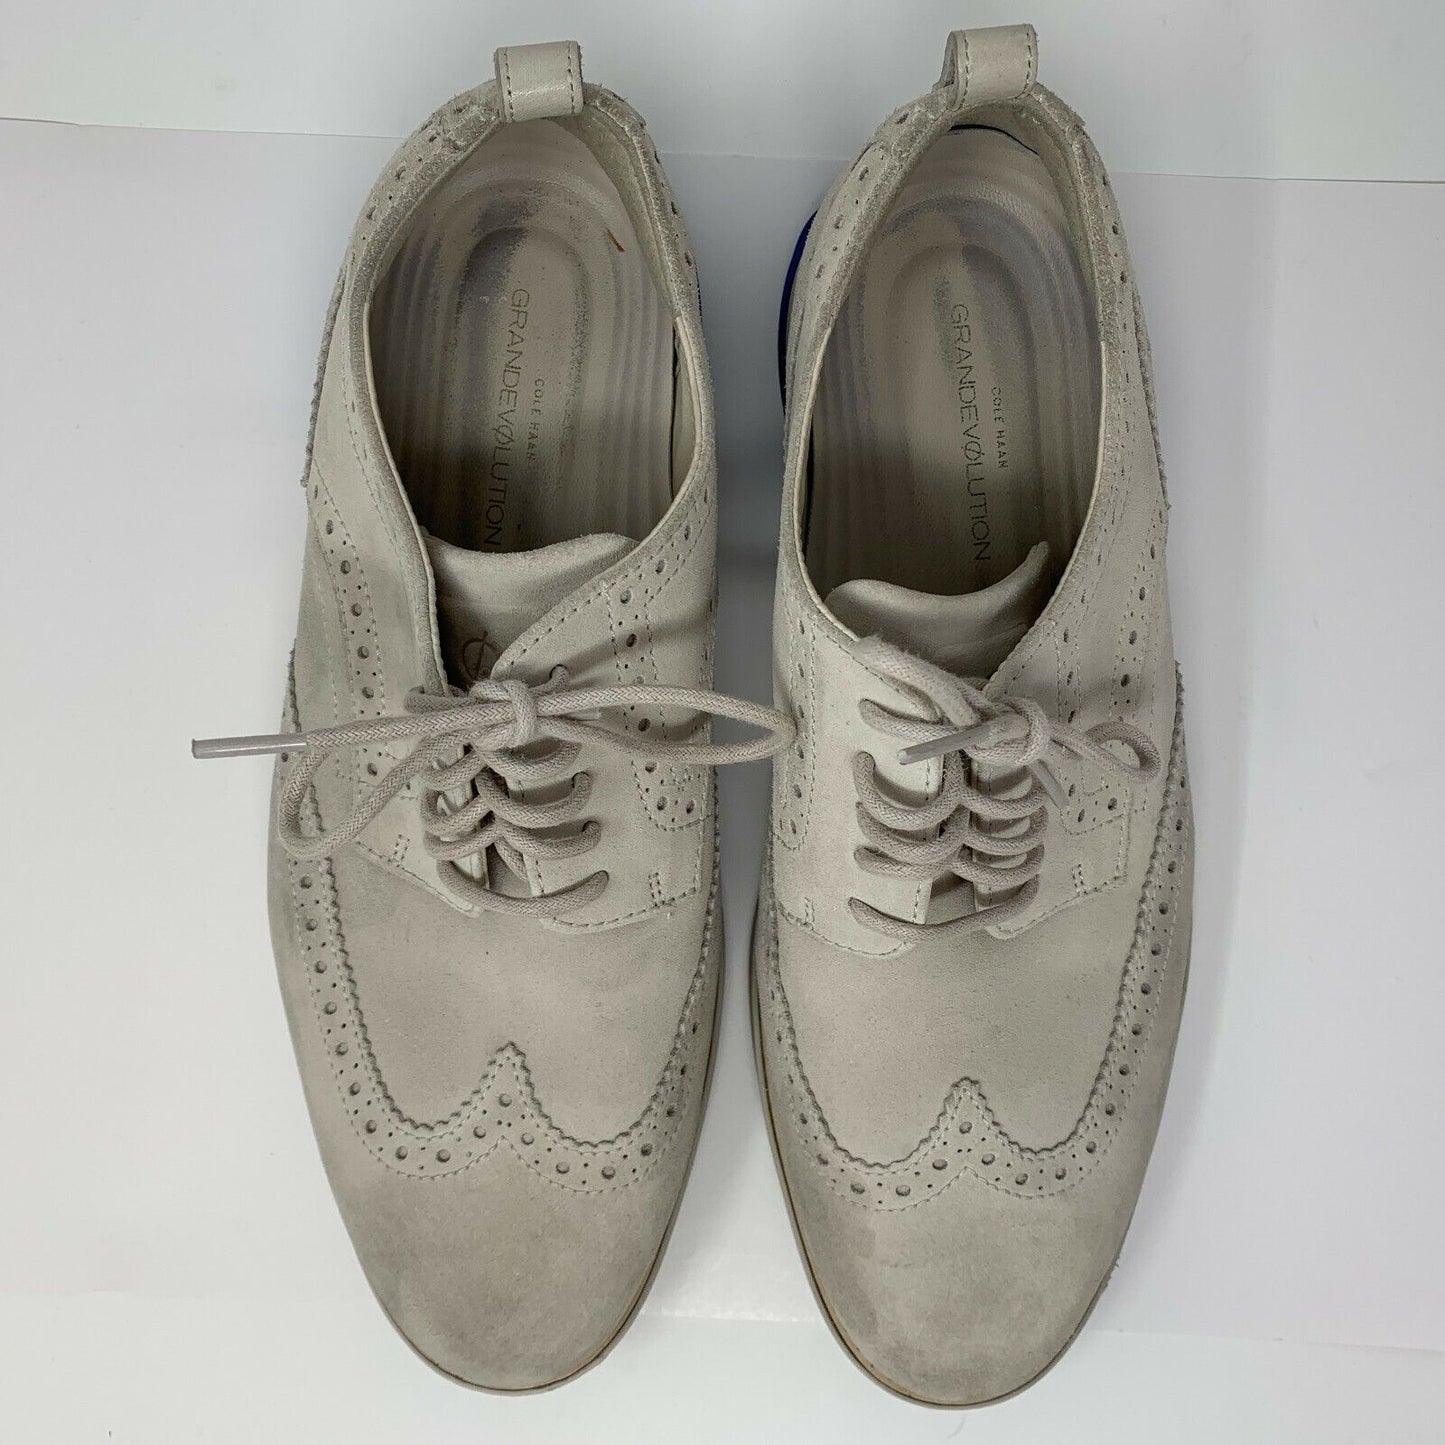 Cole Haan Grand Evolution Mens Wingtip Oxford Shoes C26311 Suede Stone White 10